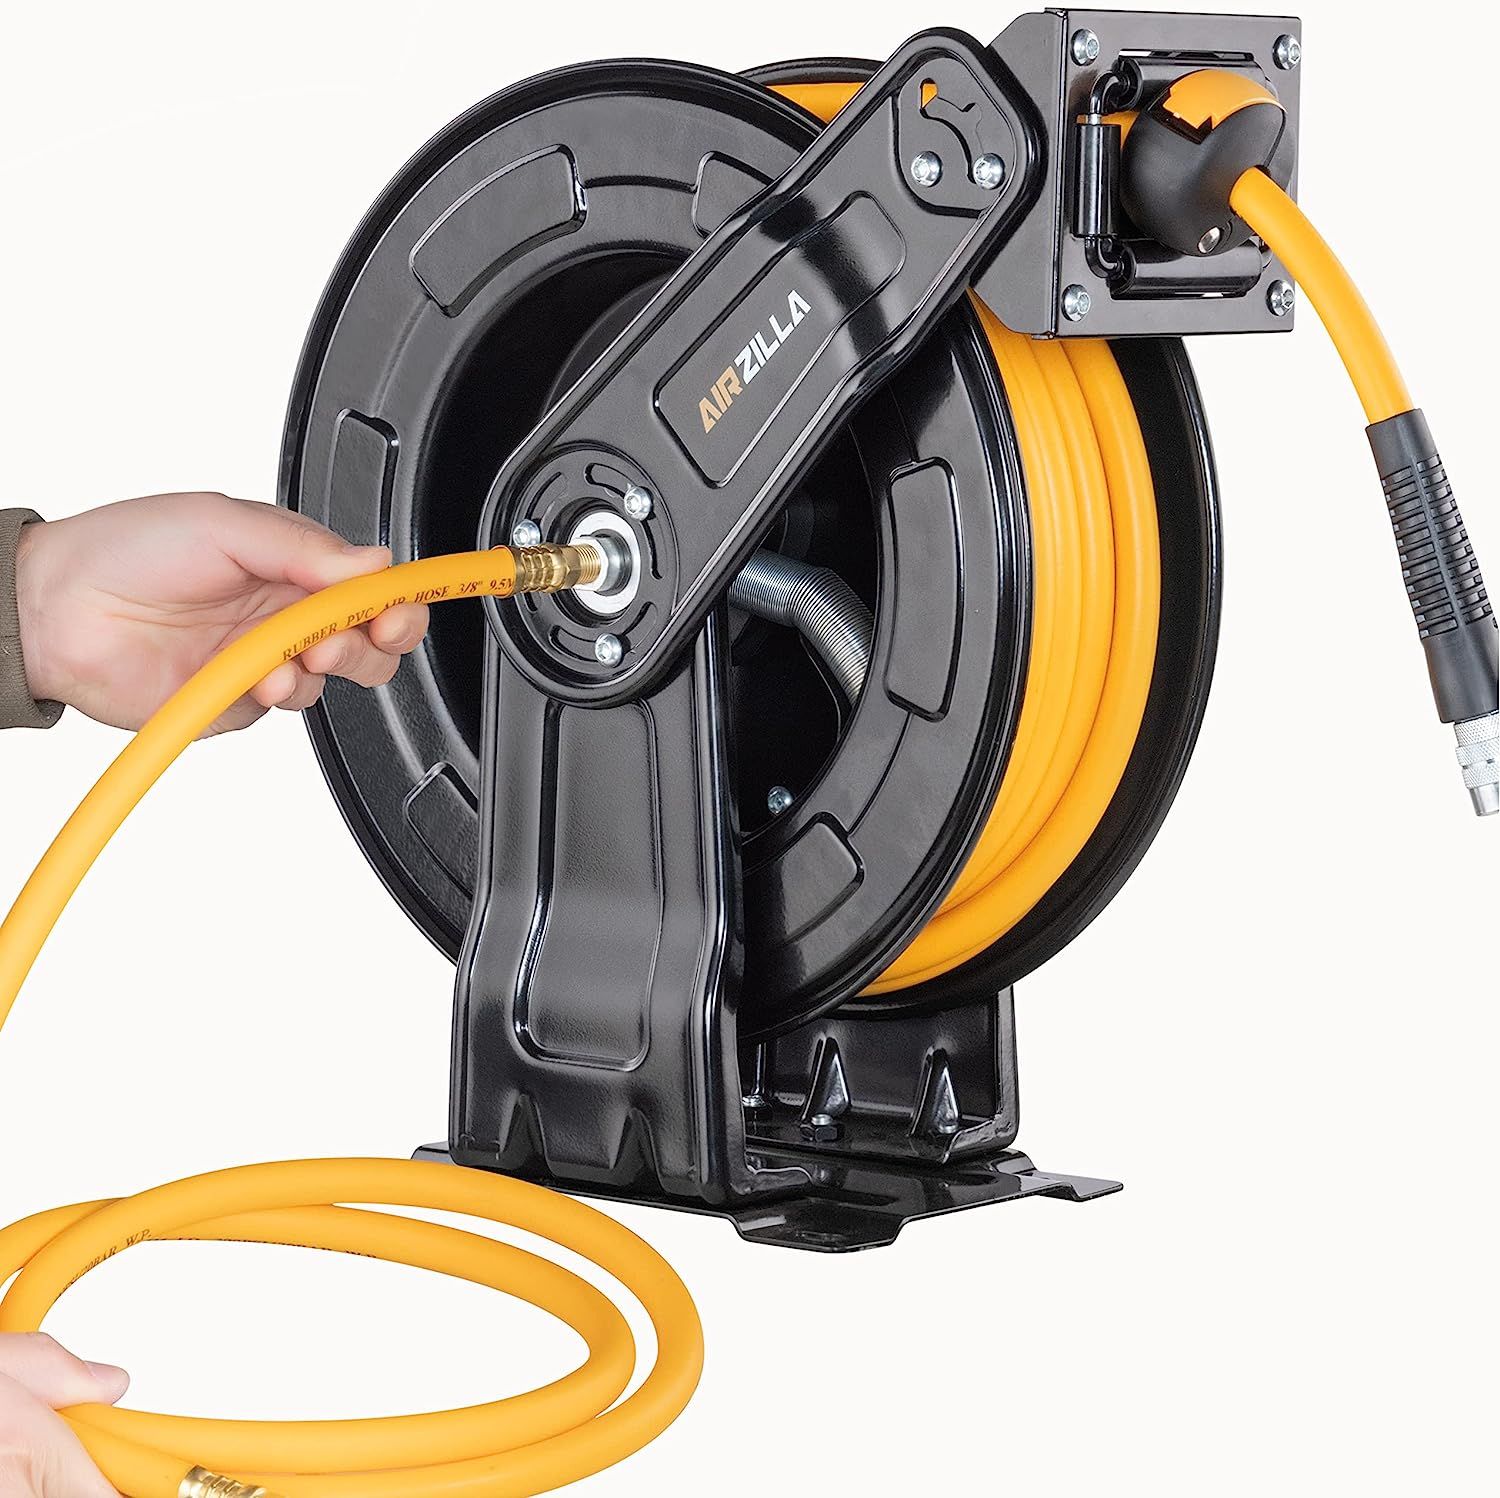 AIRZILLA Retractable Air hose reel 3/8 Inch x 50 ft Flex Hybrid Air Hose, Air  compressor Hose Reel with 6 ft Lead in, Quick Connect, Mounted 180° Swivel,  300PSI, Furniture & Home